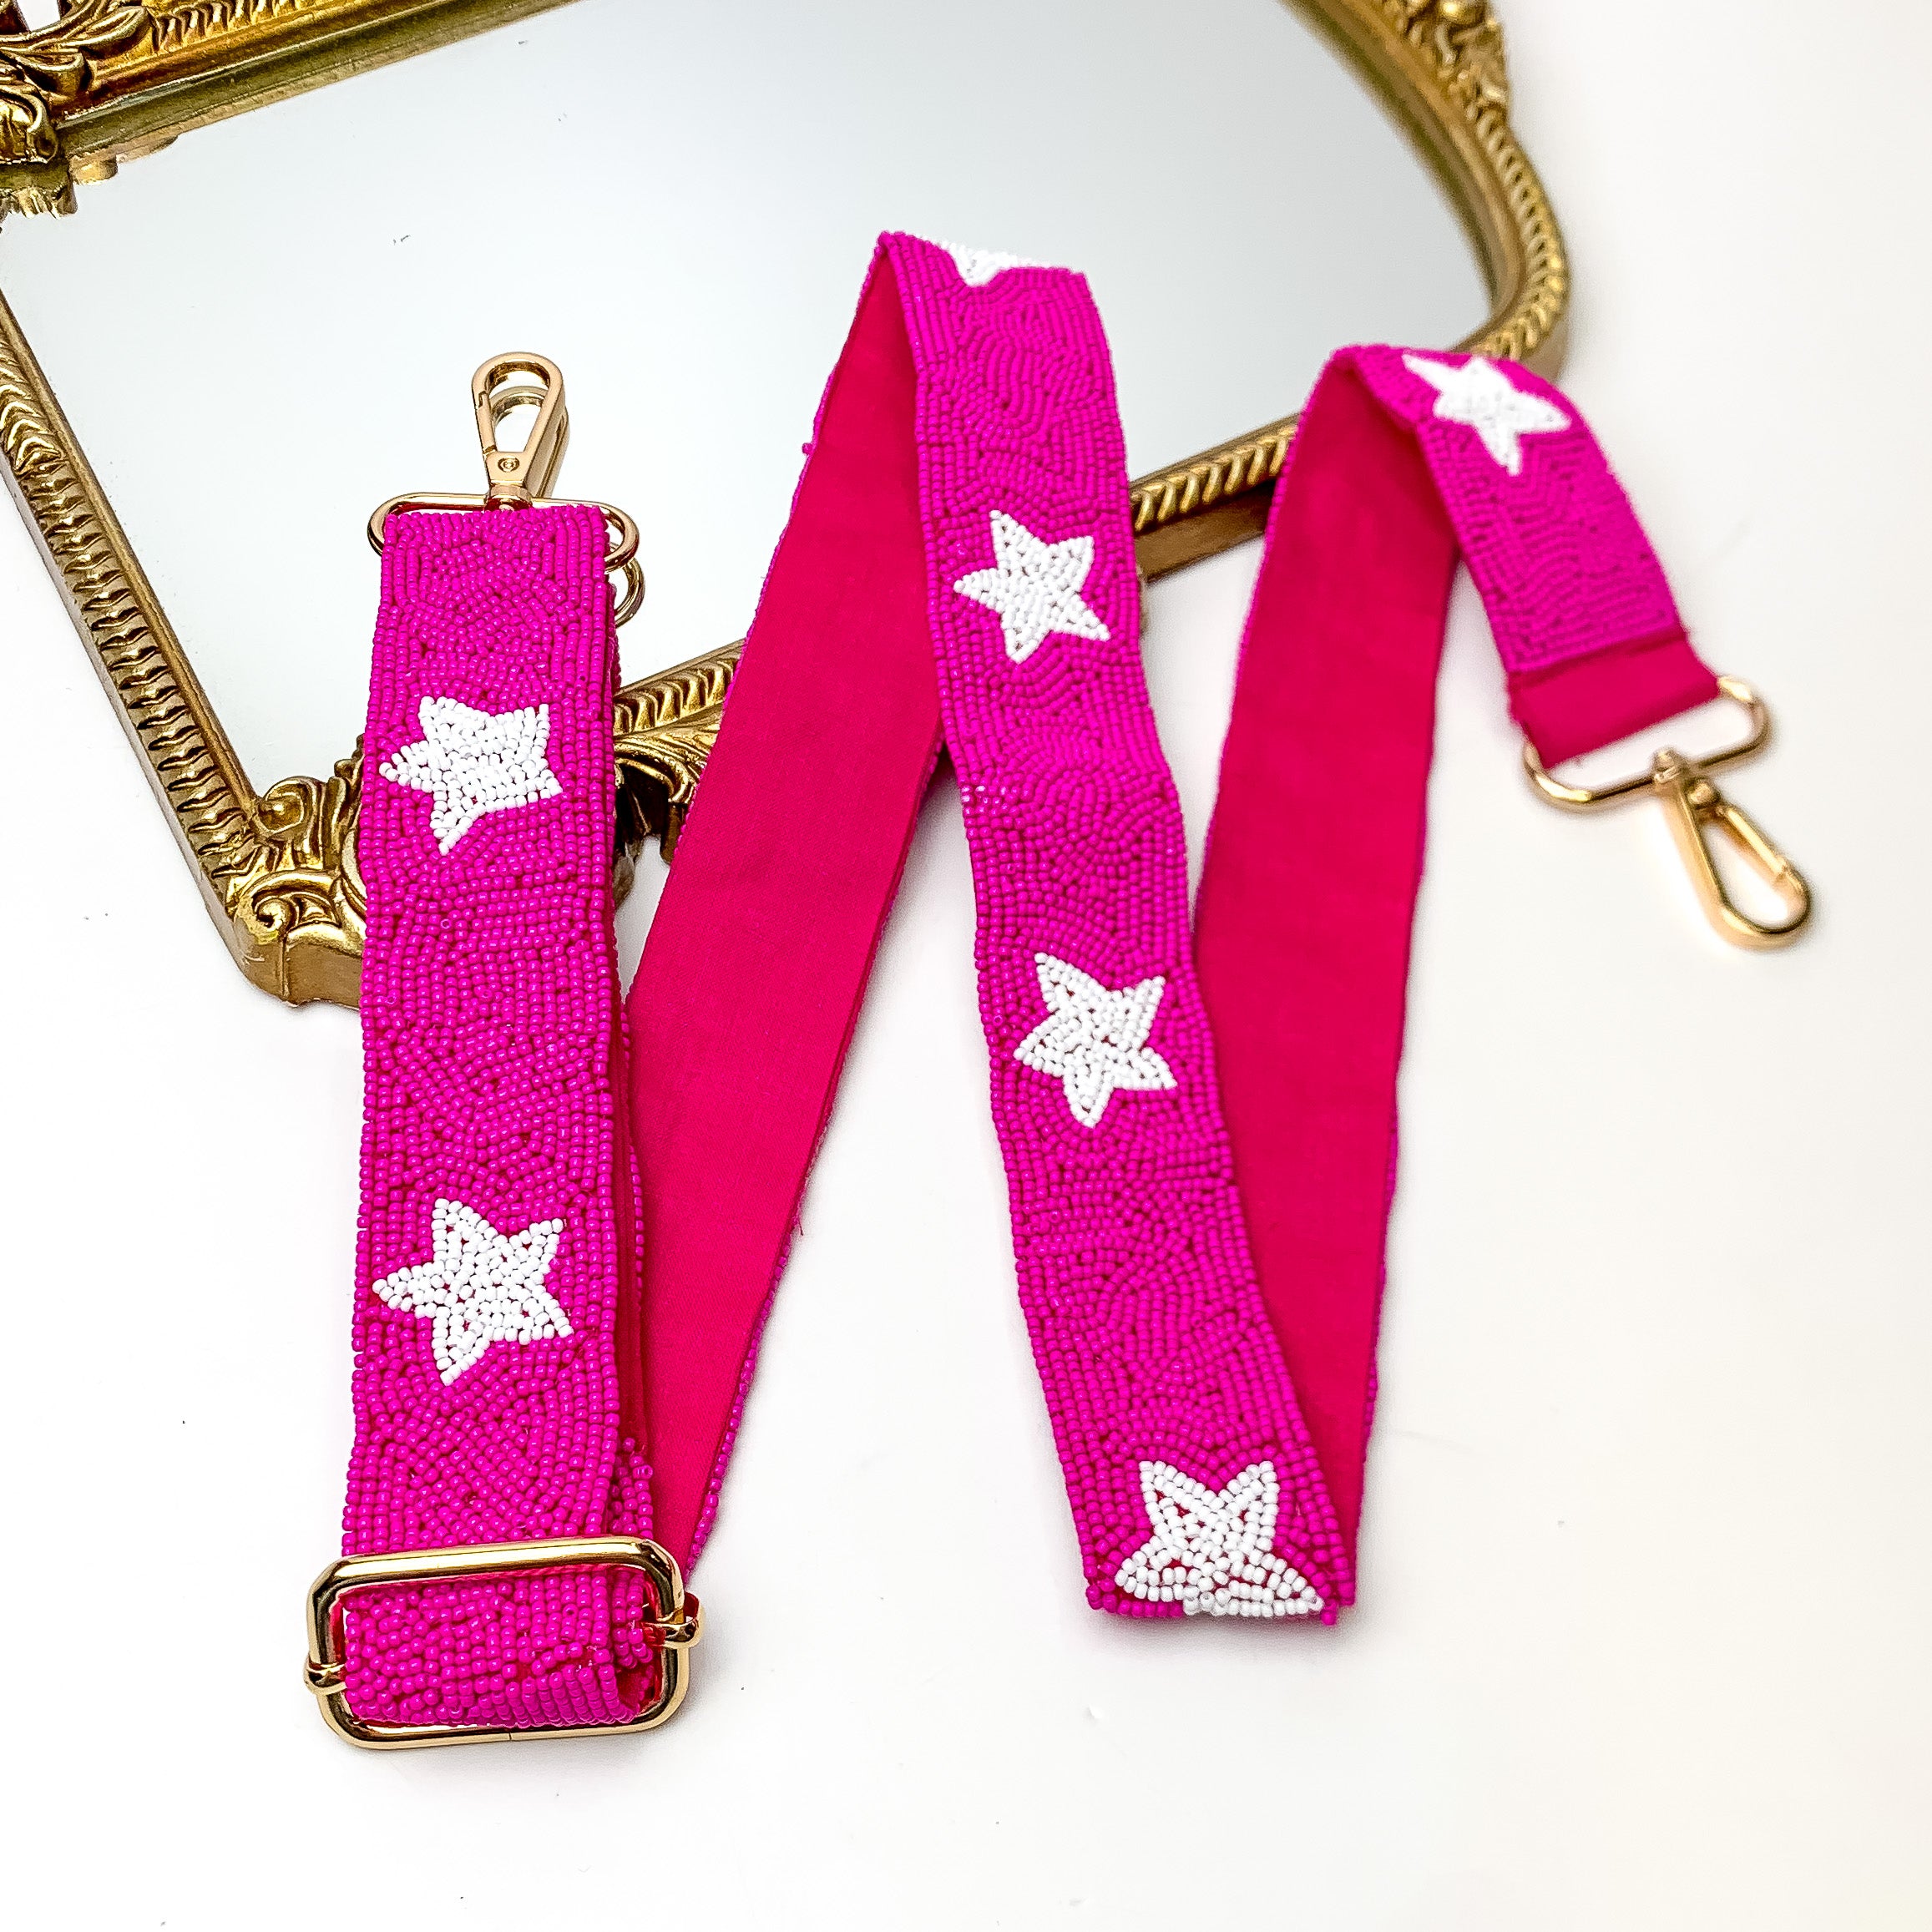 Star of the Show Beaded Adjustable Purse Strap in Pink and White. This purse strap is pictured on a white background with a gold trimmed mirror in the corner.